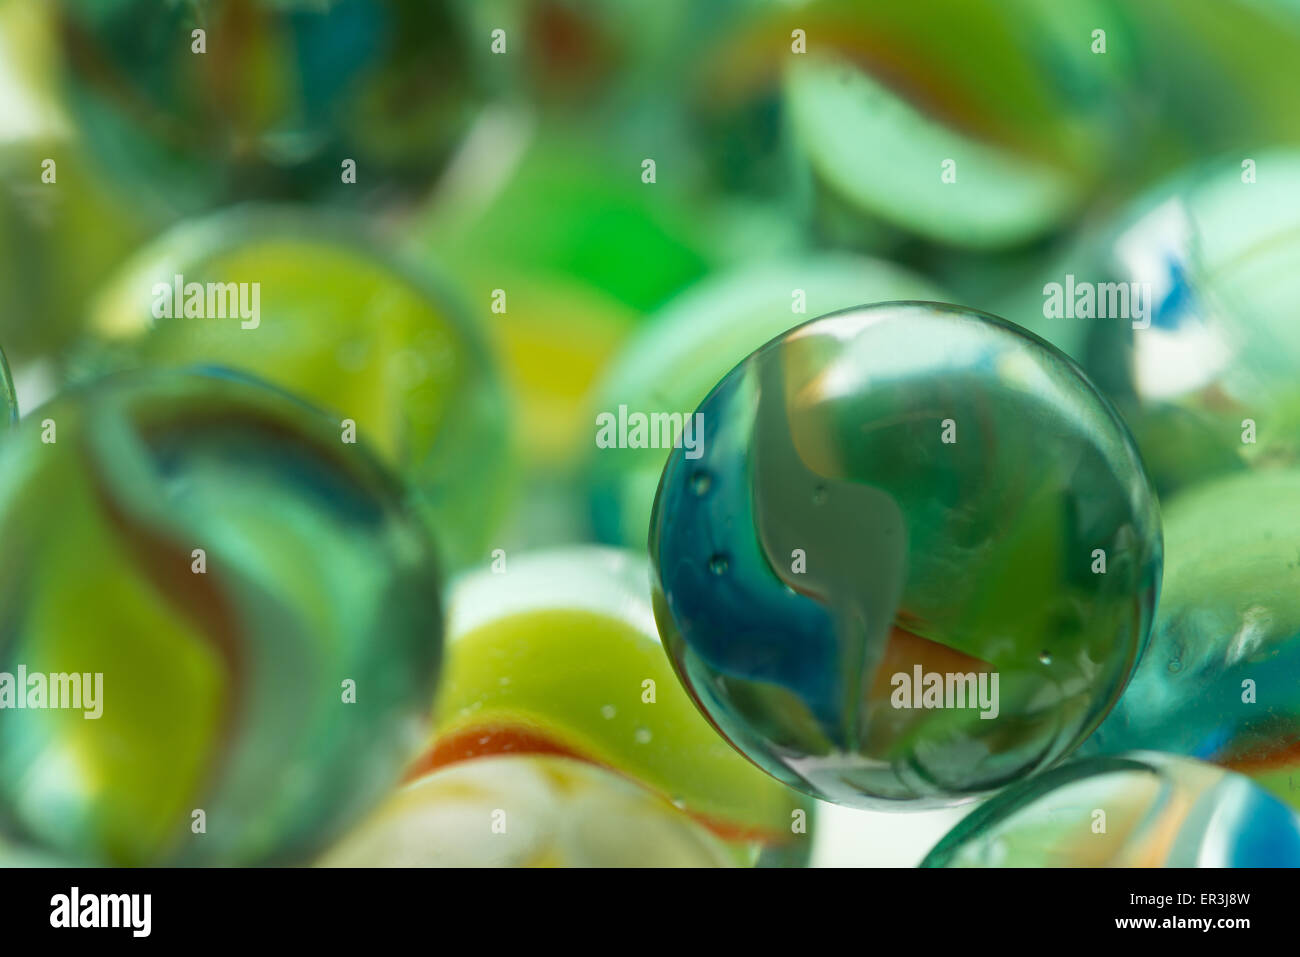 collection of old glass transparent marbles with unique swirls of colored glass trapped inside Stock Photo